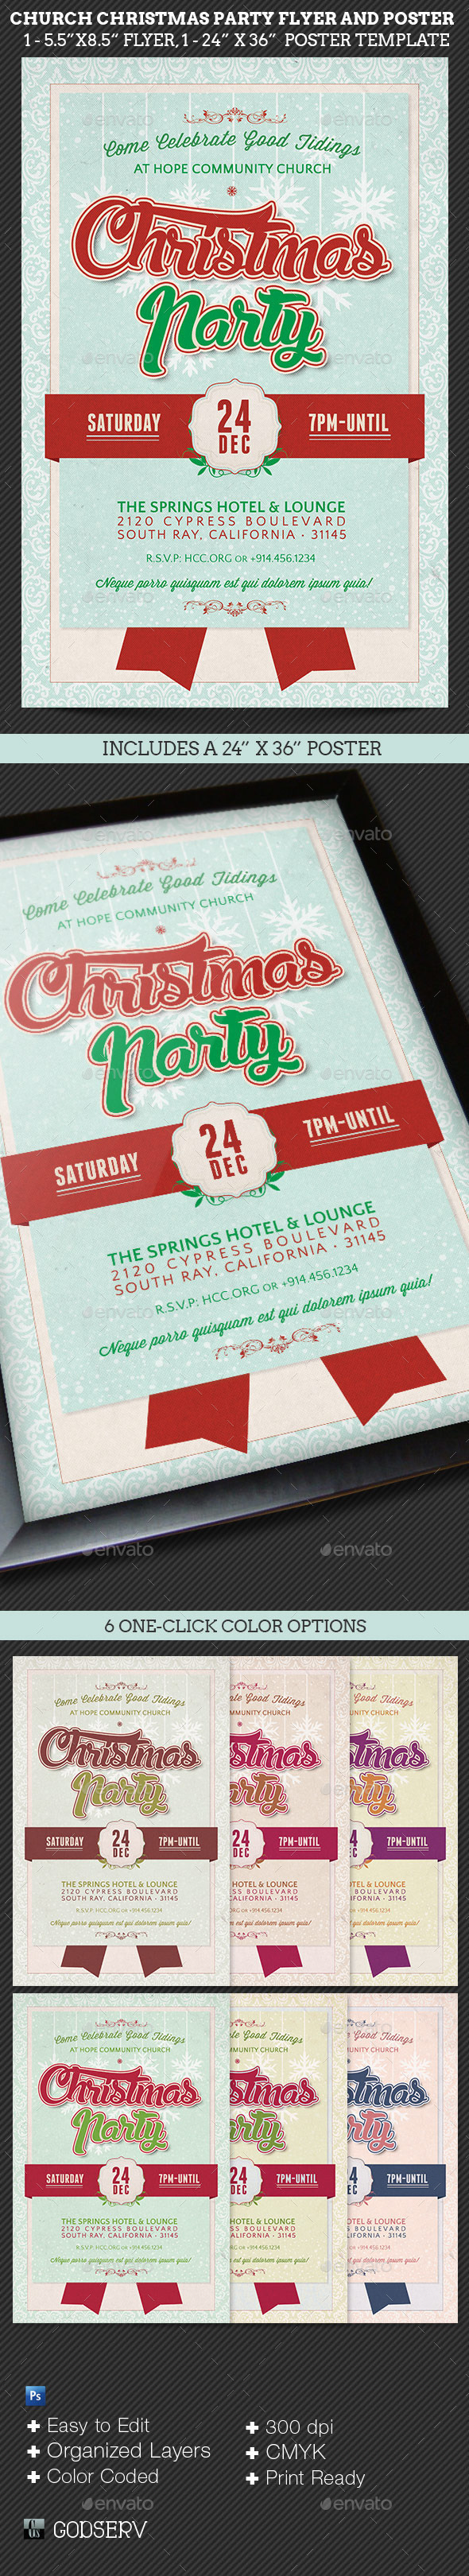 Church Christmas Party Flyer Poster Template